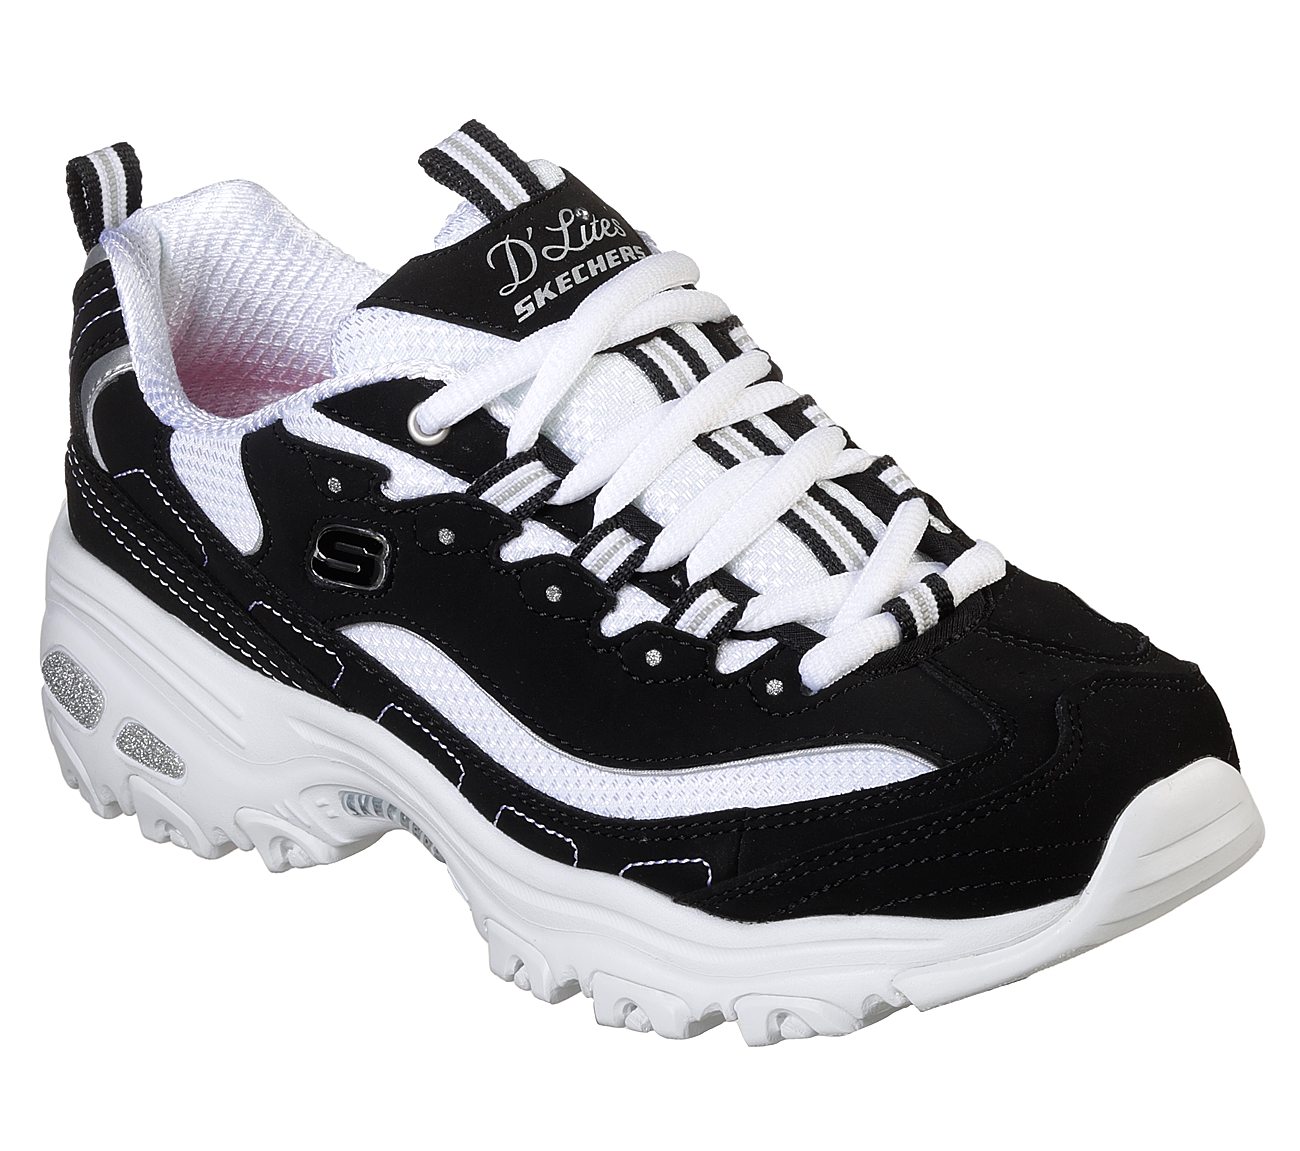 are sketcher shoes good for your feet